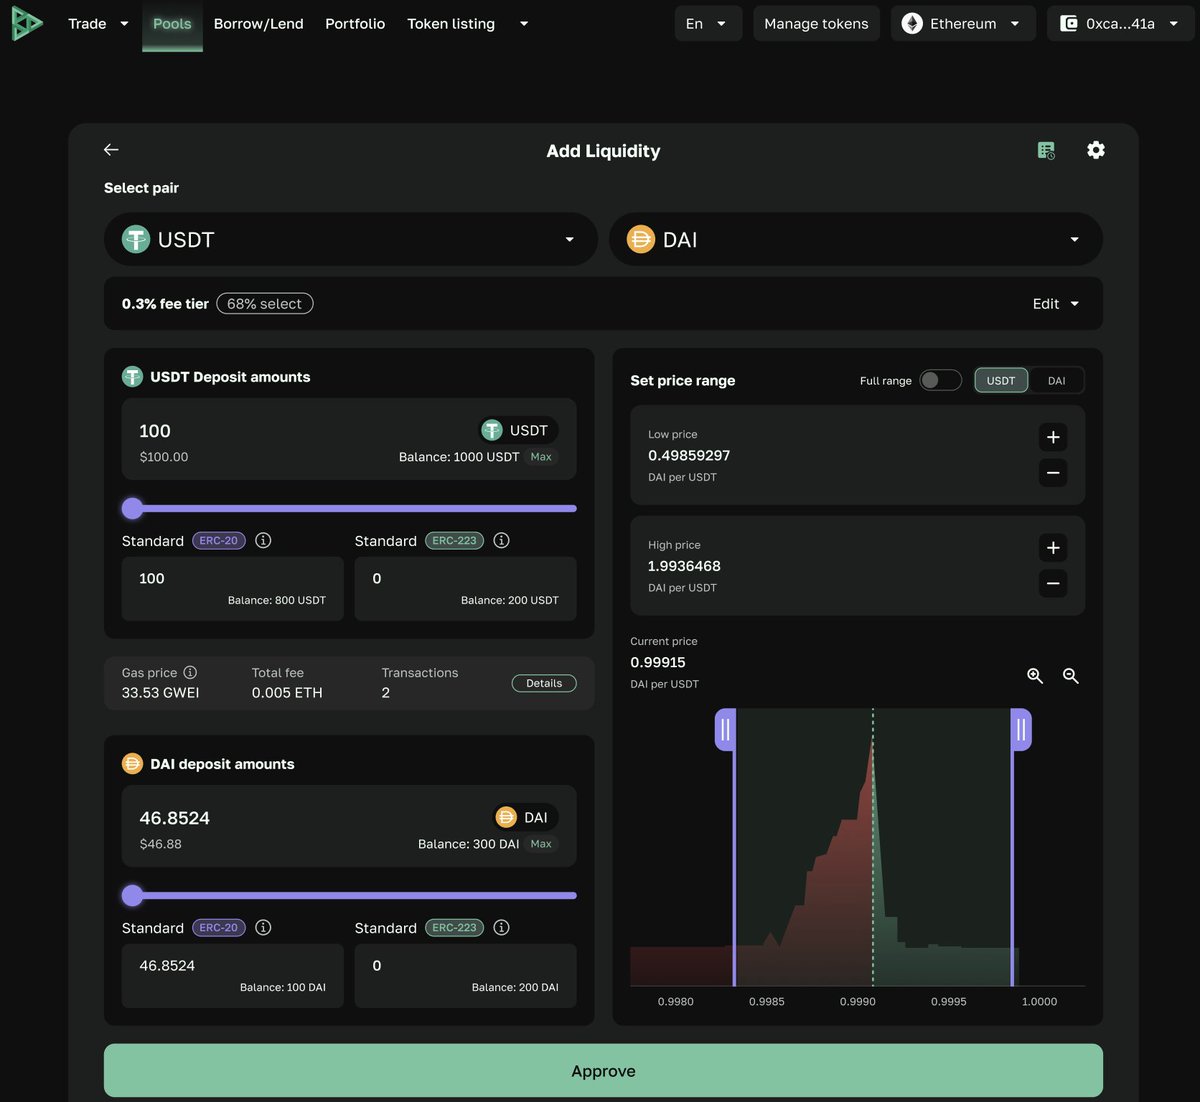 Take a sneak peek into the sleek #Dex223 interface! Our Liquidity Adding and Swap Pages are polished to perfection, offering a seamless user experience. Stay tuned as we finalize the #MarginTrading page and introduce support for 'double standard' tokens, ushering in a new era